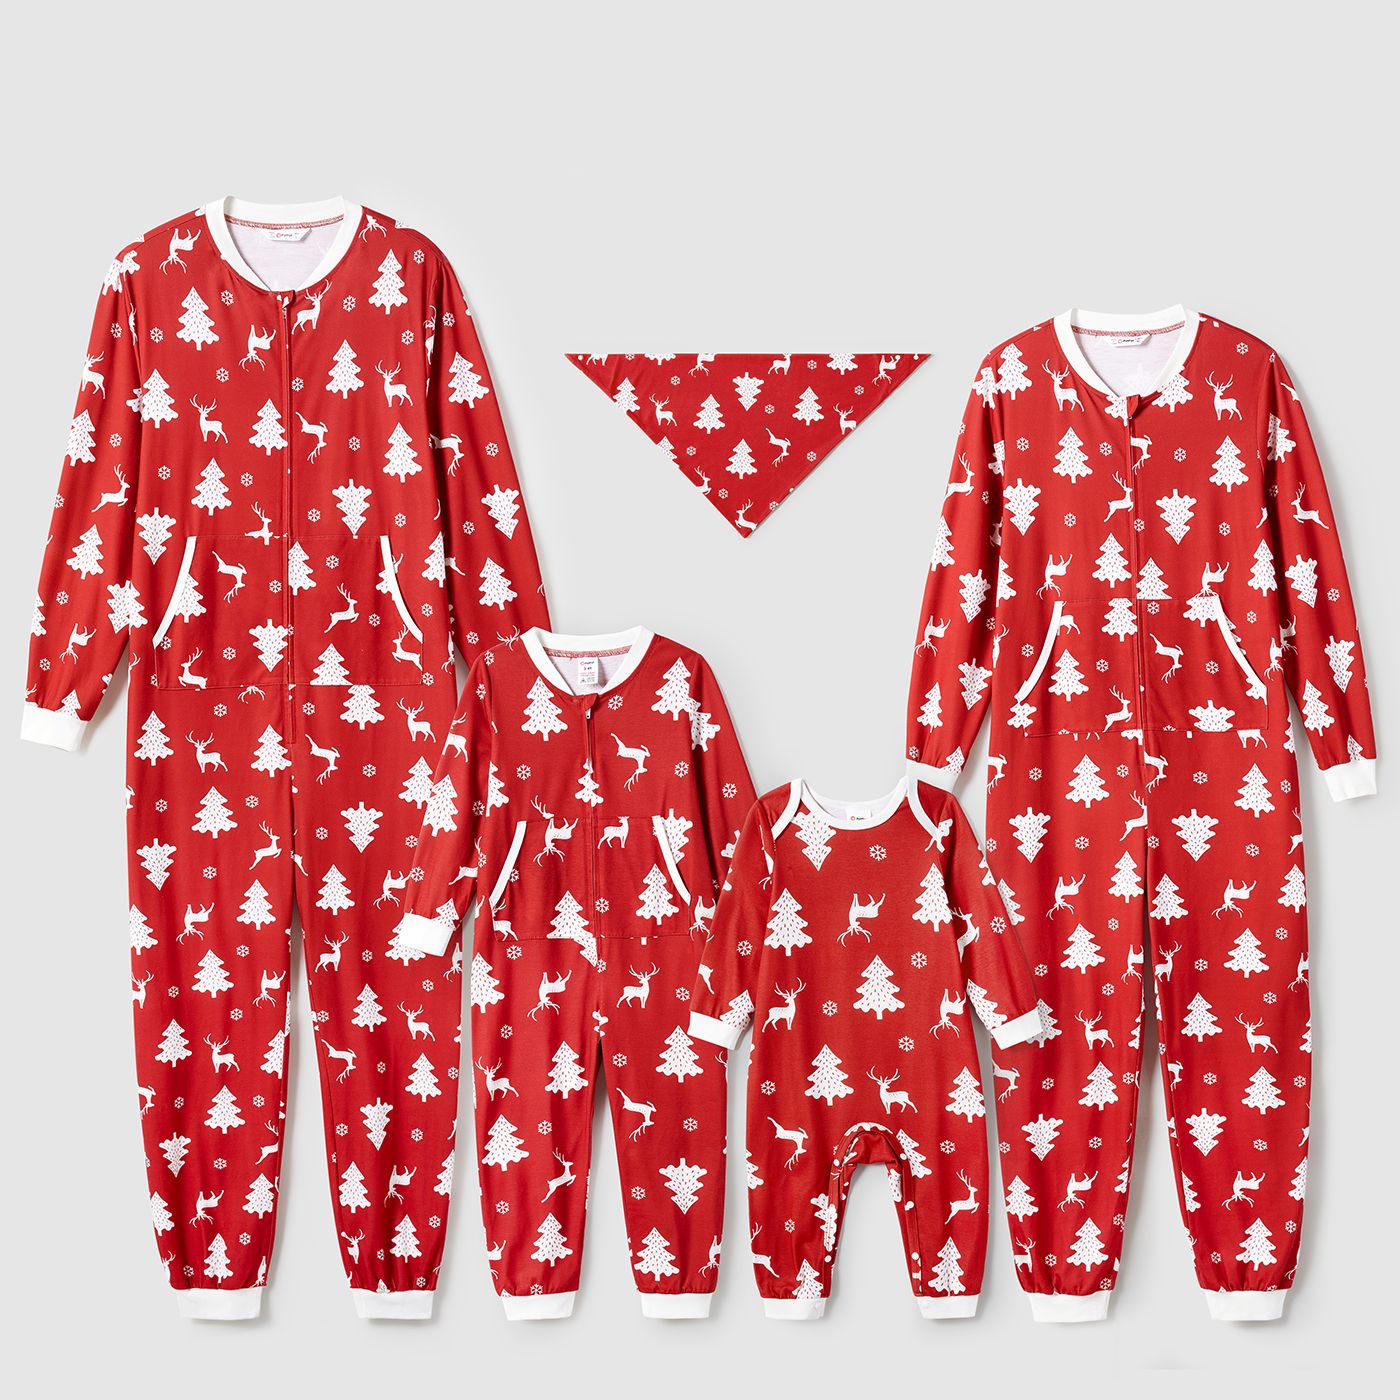 

Christmas Tree and Reindeer Allover Print Family Matching Long-sleeve Onesies Pajamas Sets (Flame Resistant)